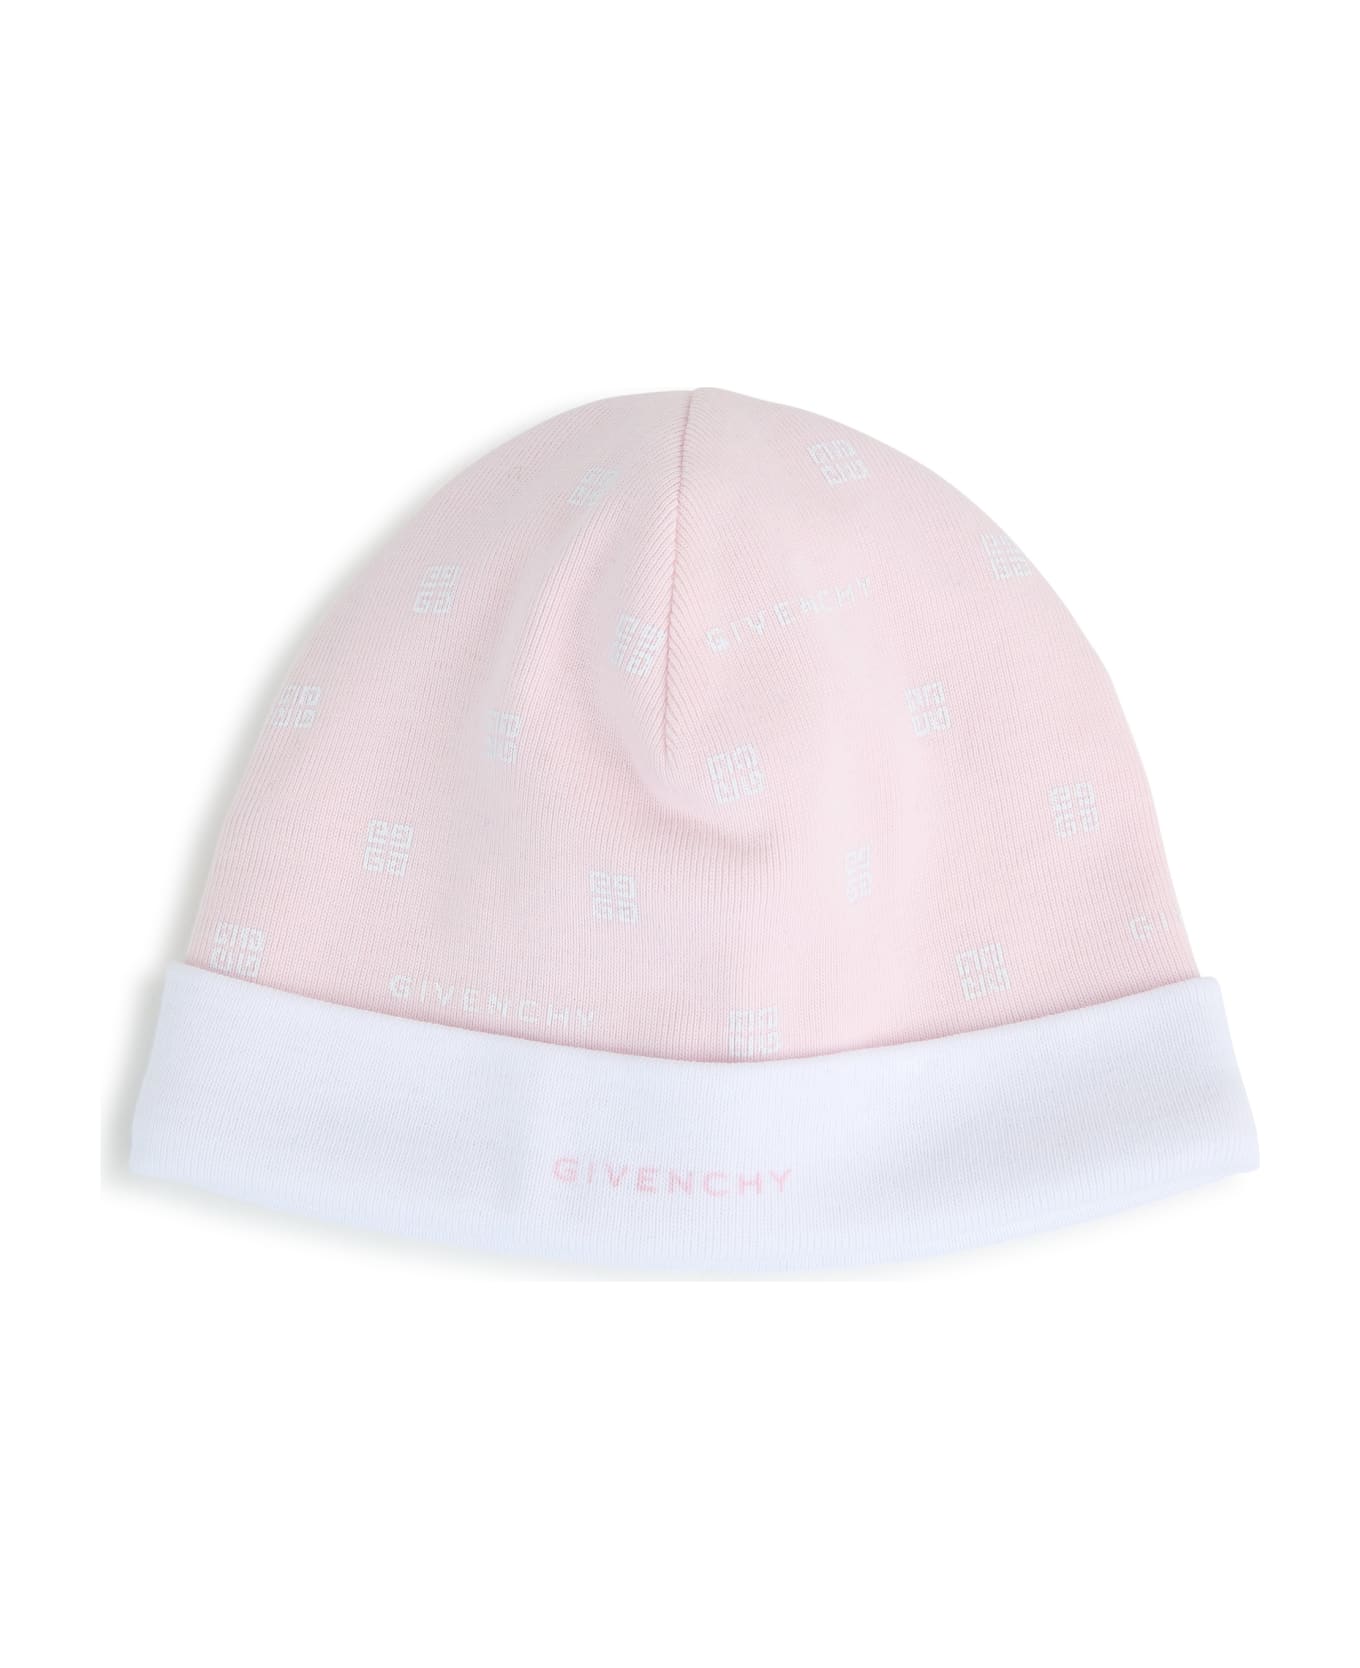 Givenchy Set Of Two Caps With 4g Print - Pink アクセサリー＆ギフト